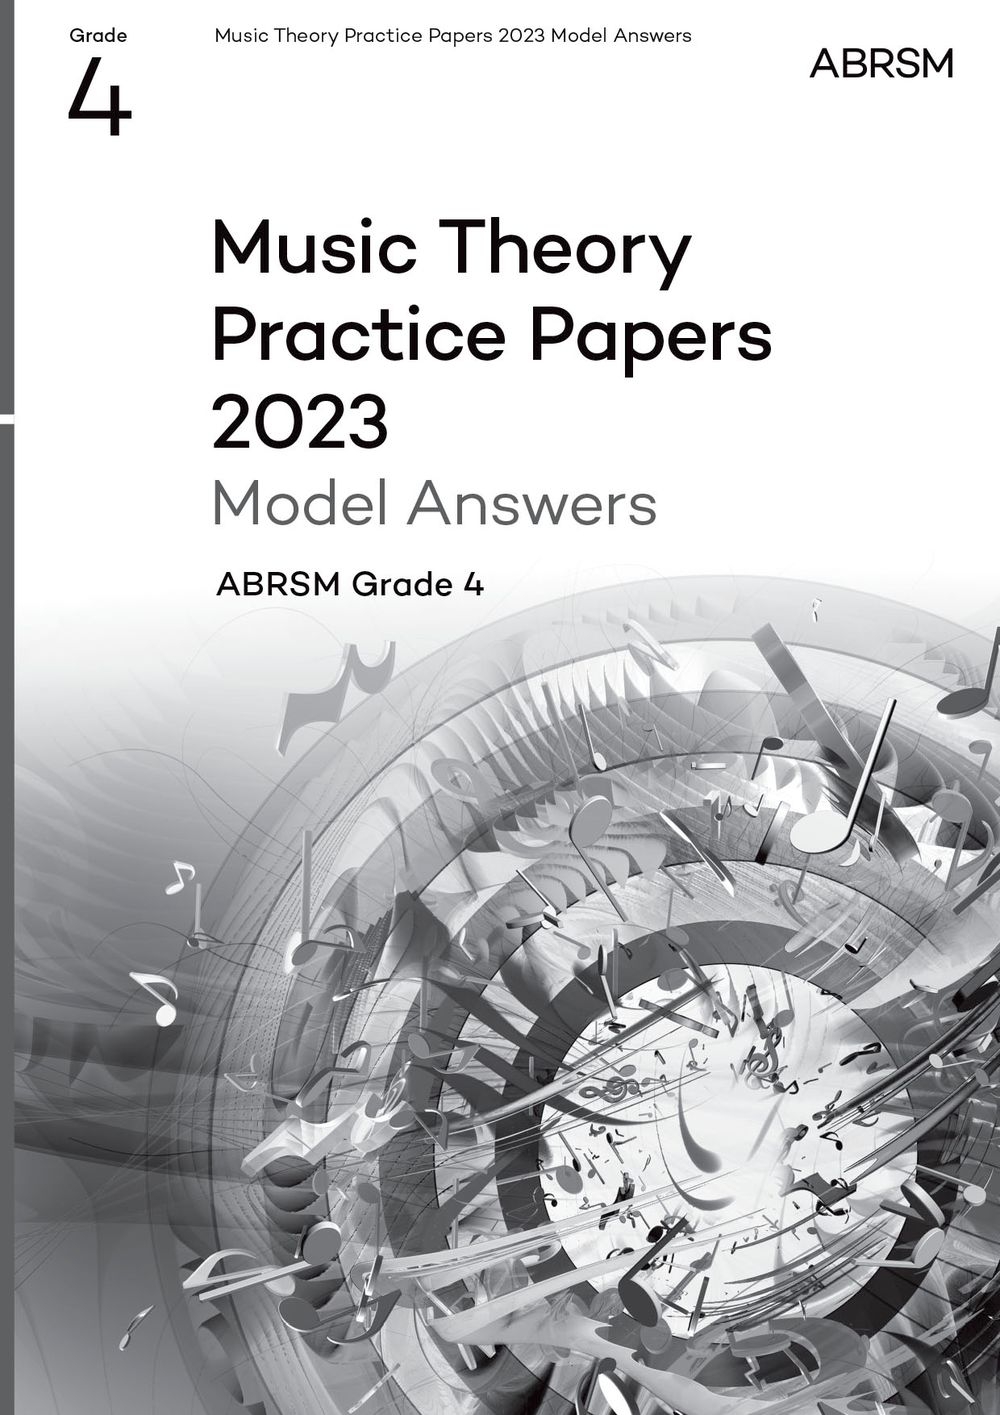 Music Theory Practice Papers Model Answers 2023 G4